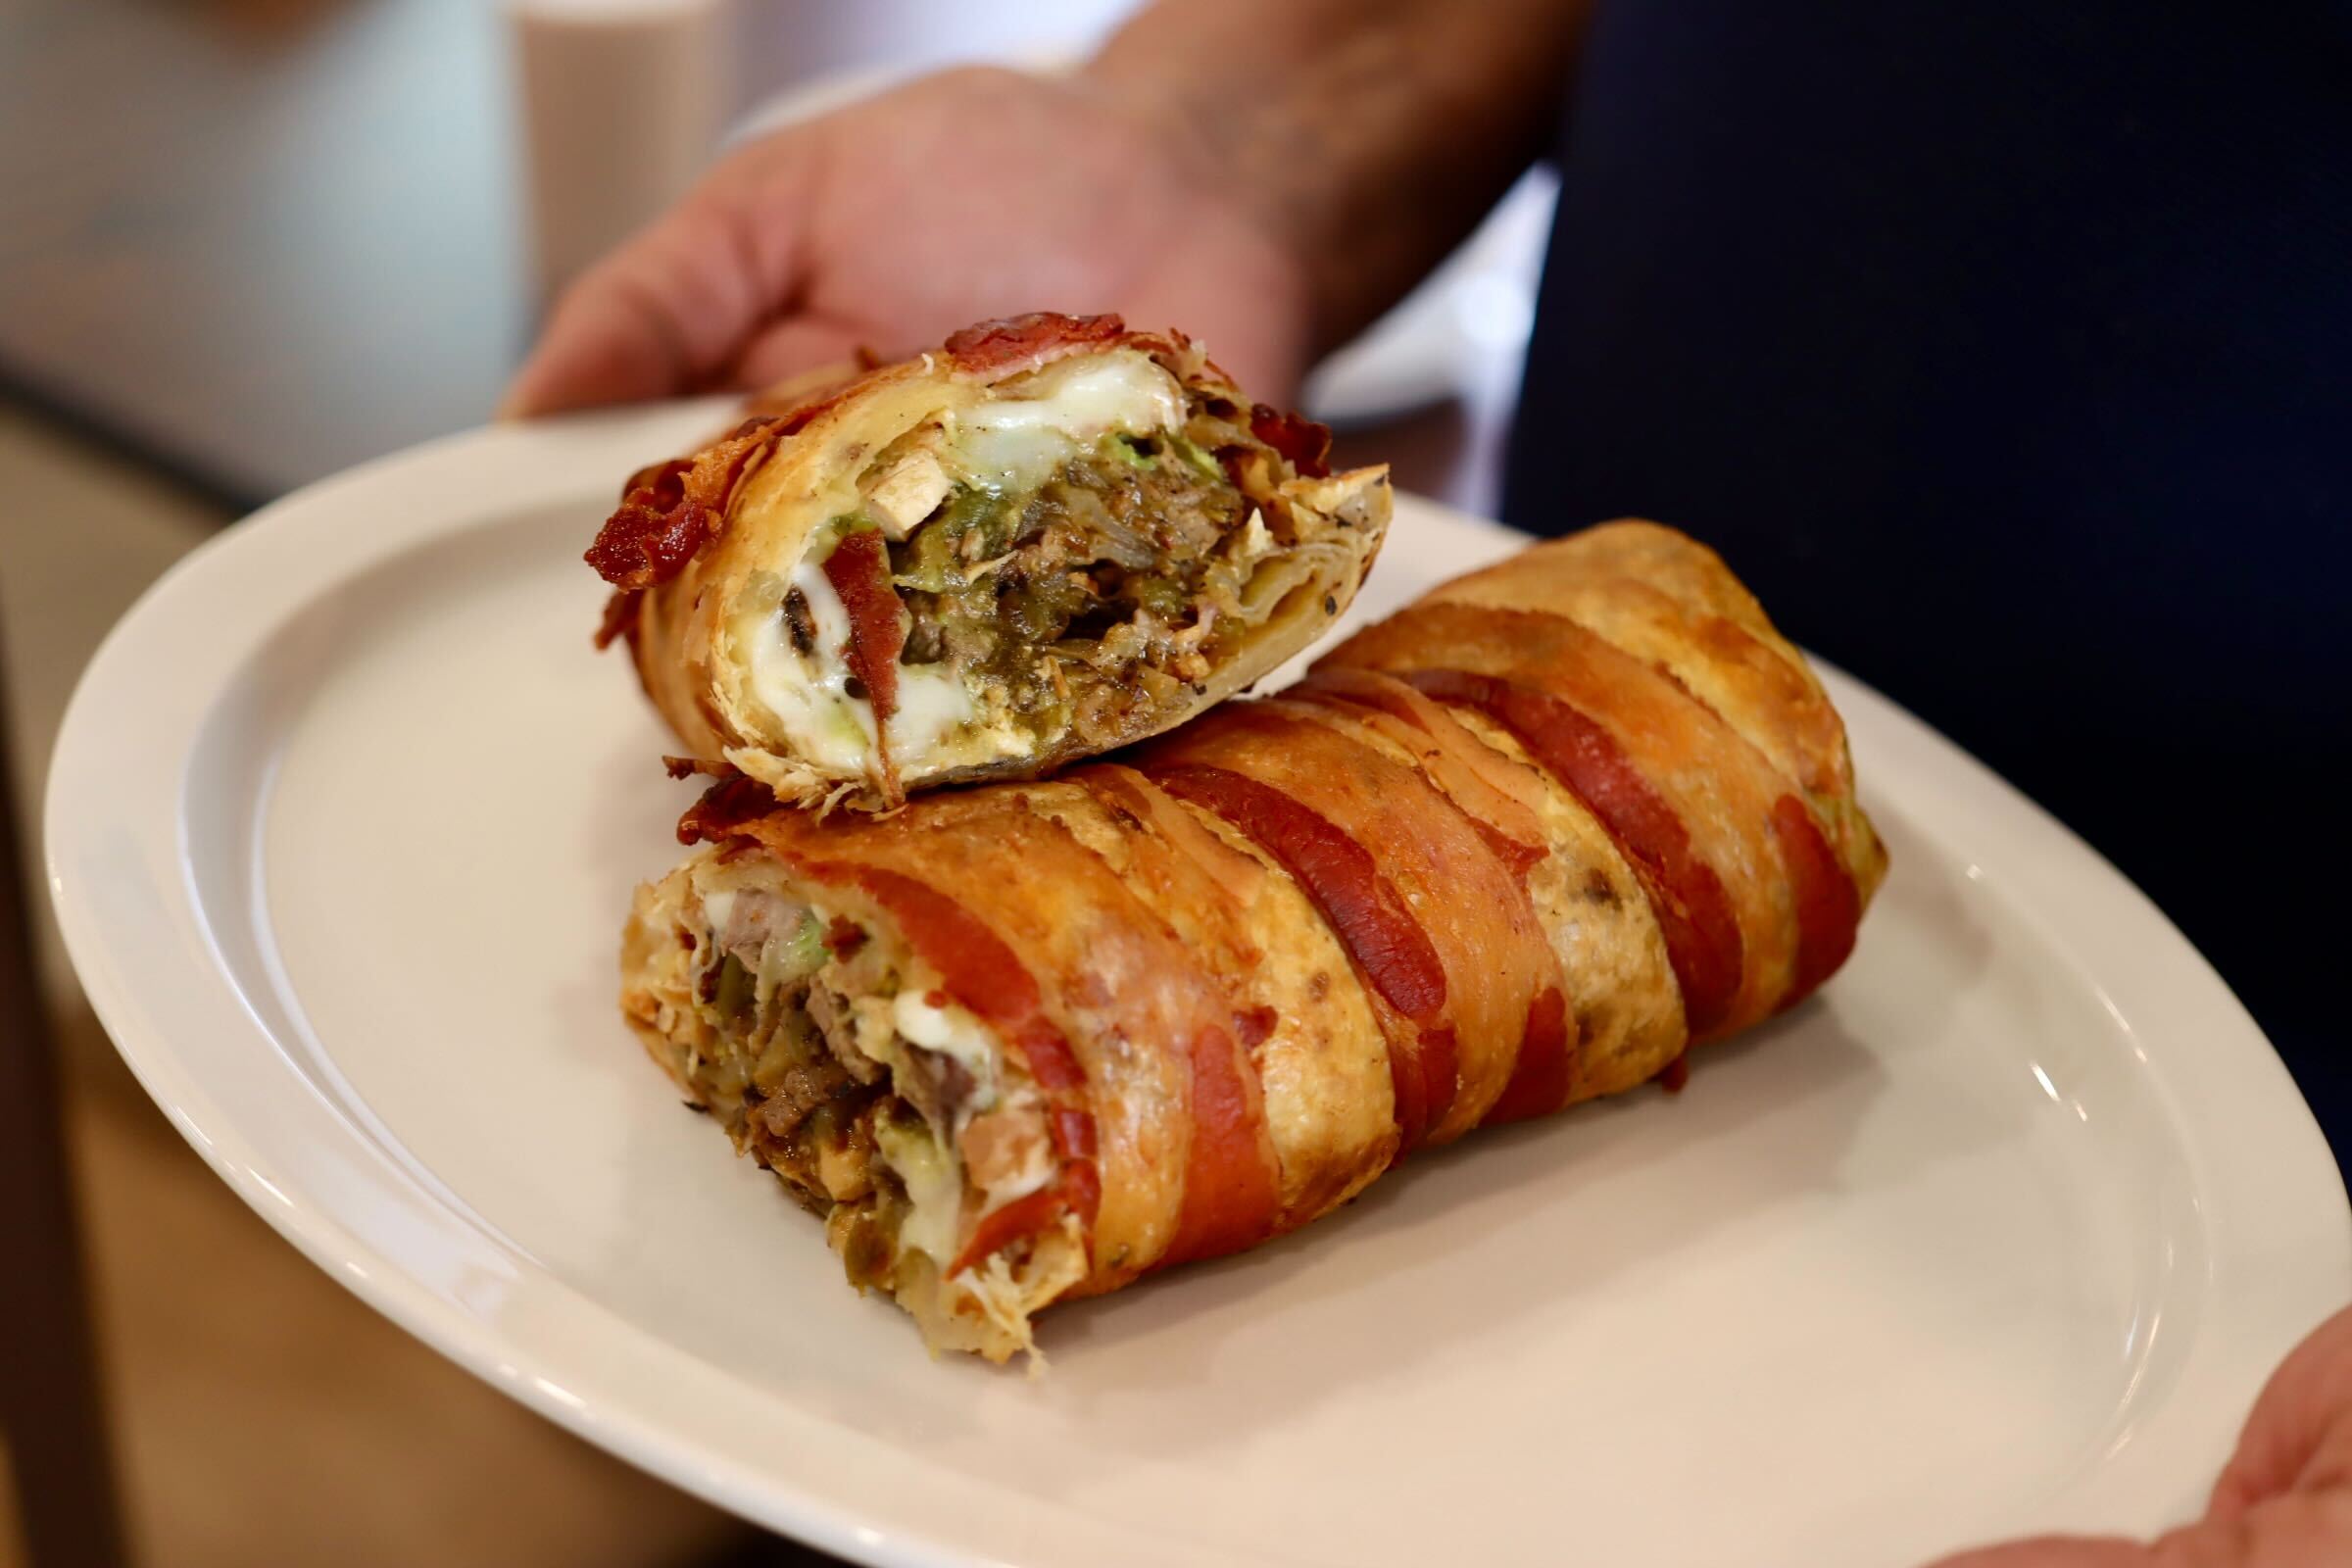 Bacon-wrapped Burrito at Salsa Verde (Photo by Hannah Hernandez)